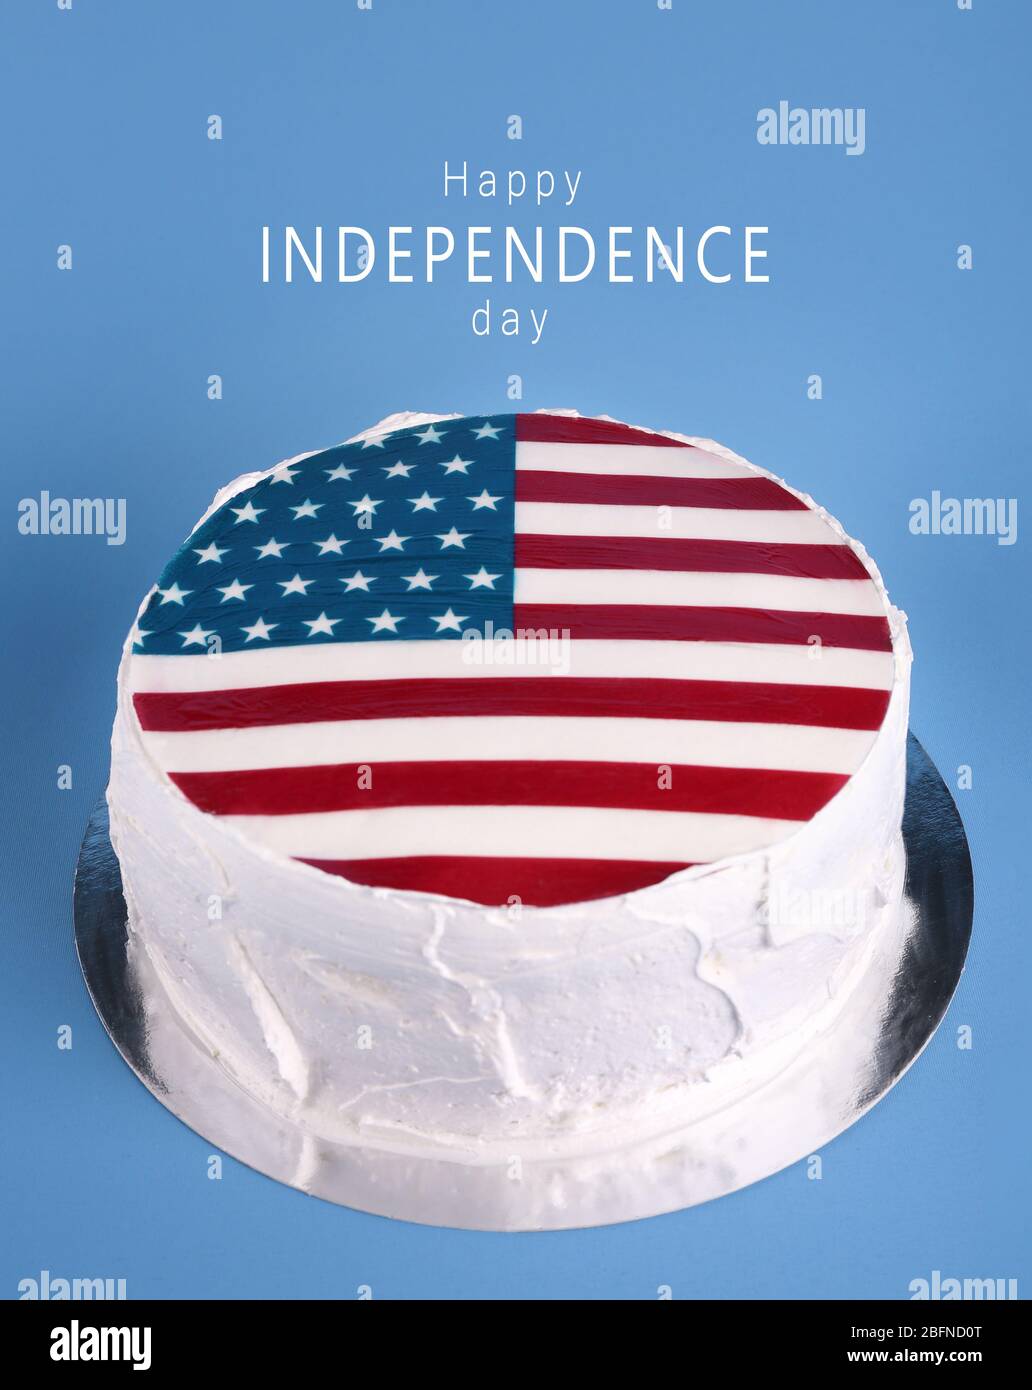 Shop for Fresh Independence Day Special Tri Color Cake online - Sirsa